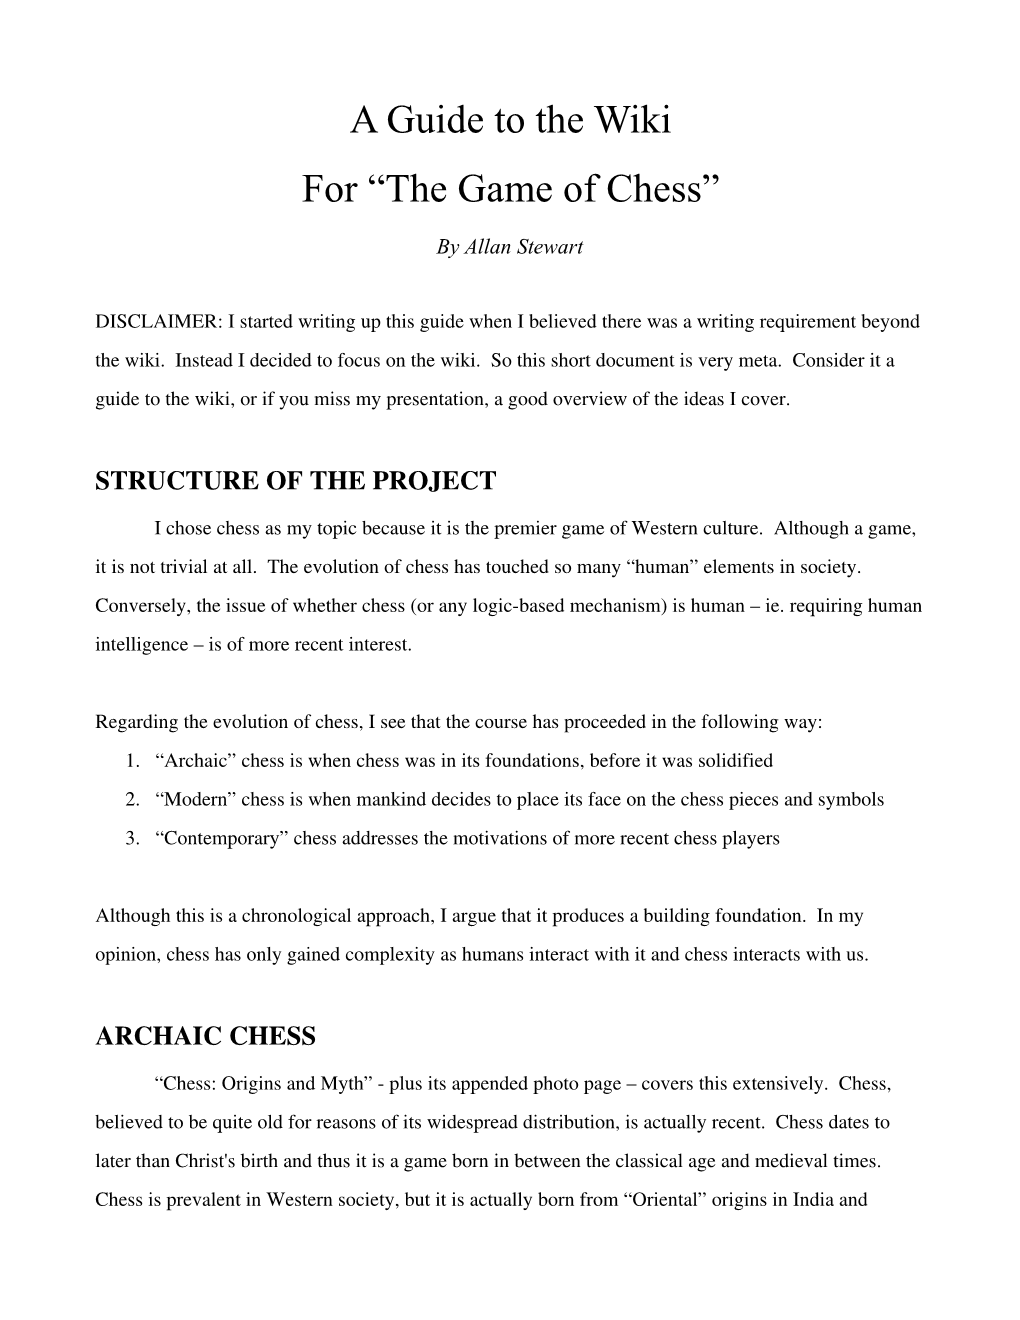 Guide to Chess.Pdf